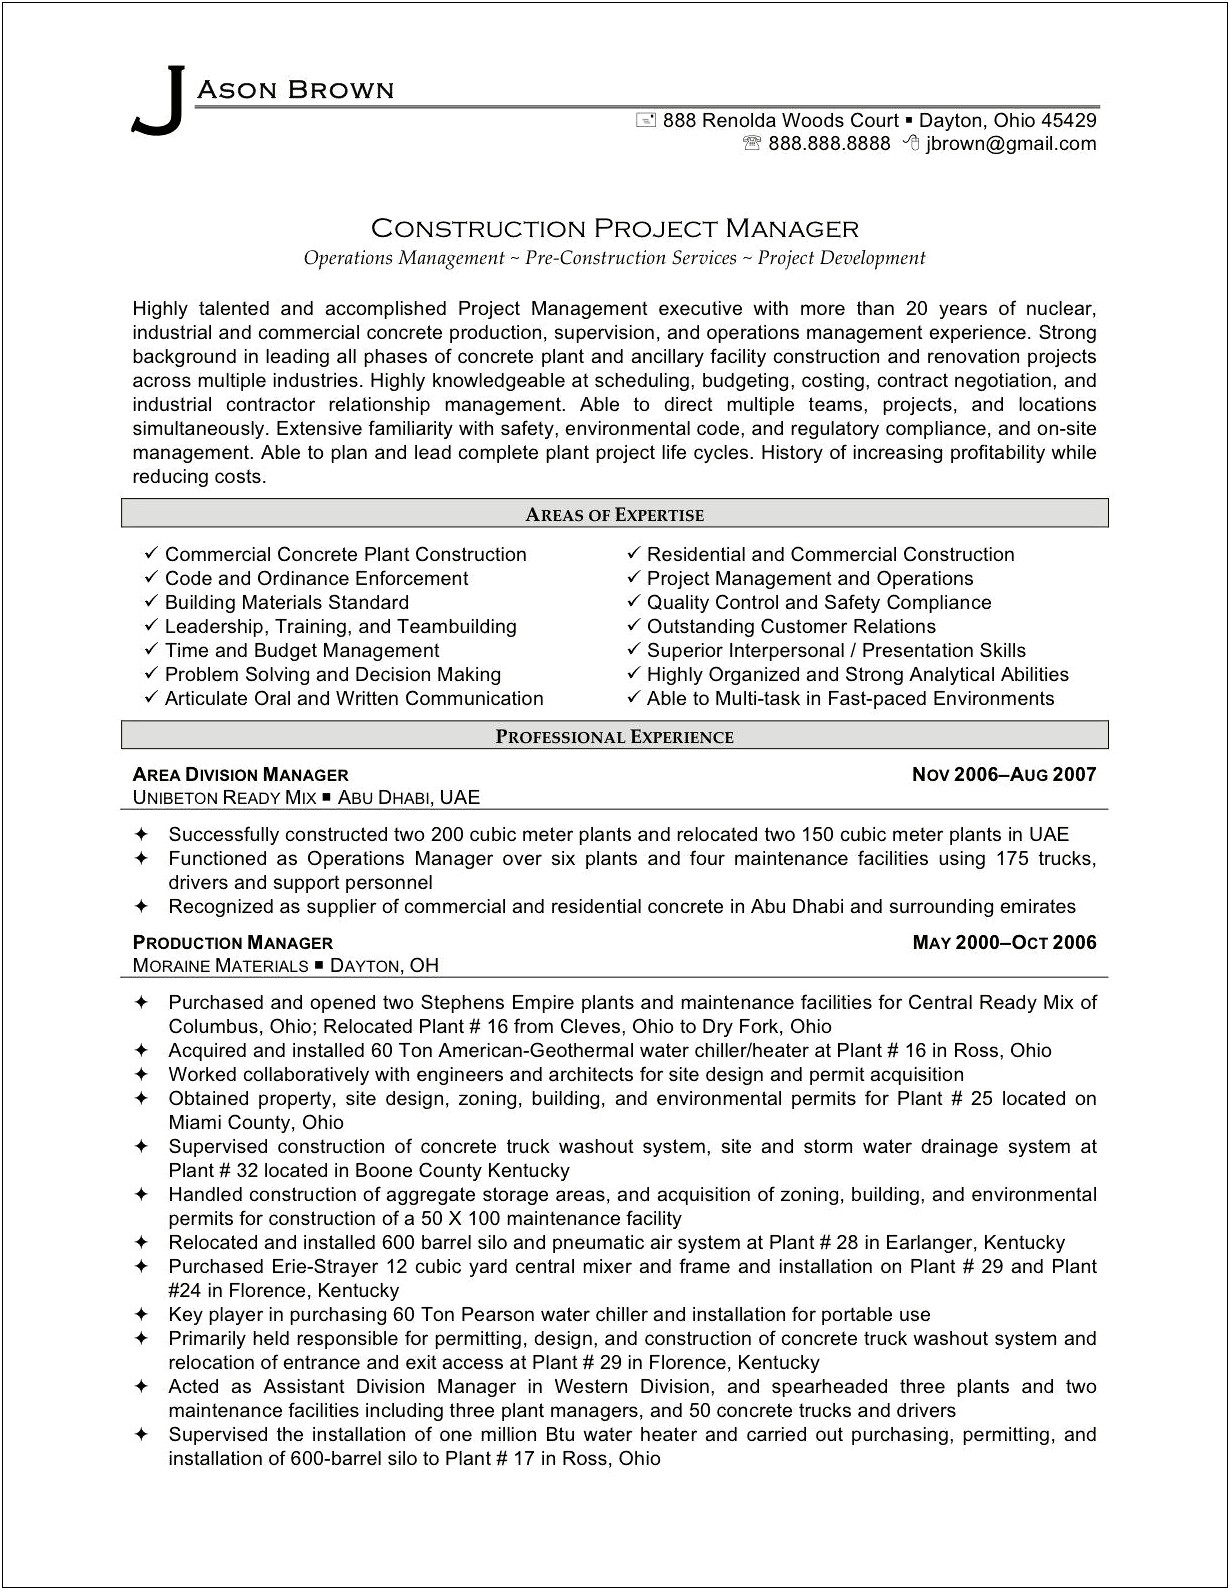 Best Construction Project Manager Resume Ever